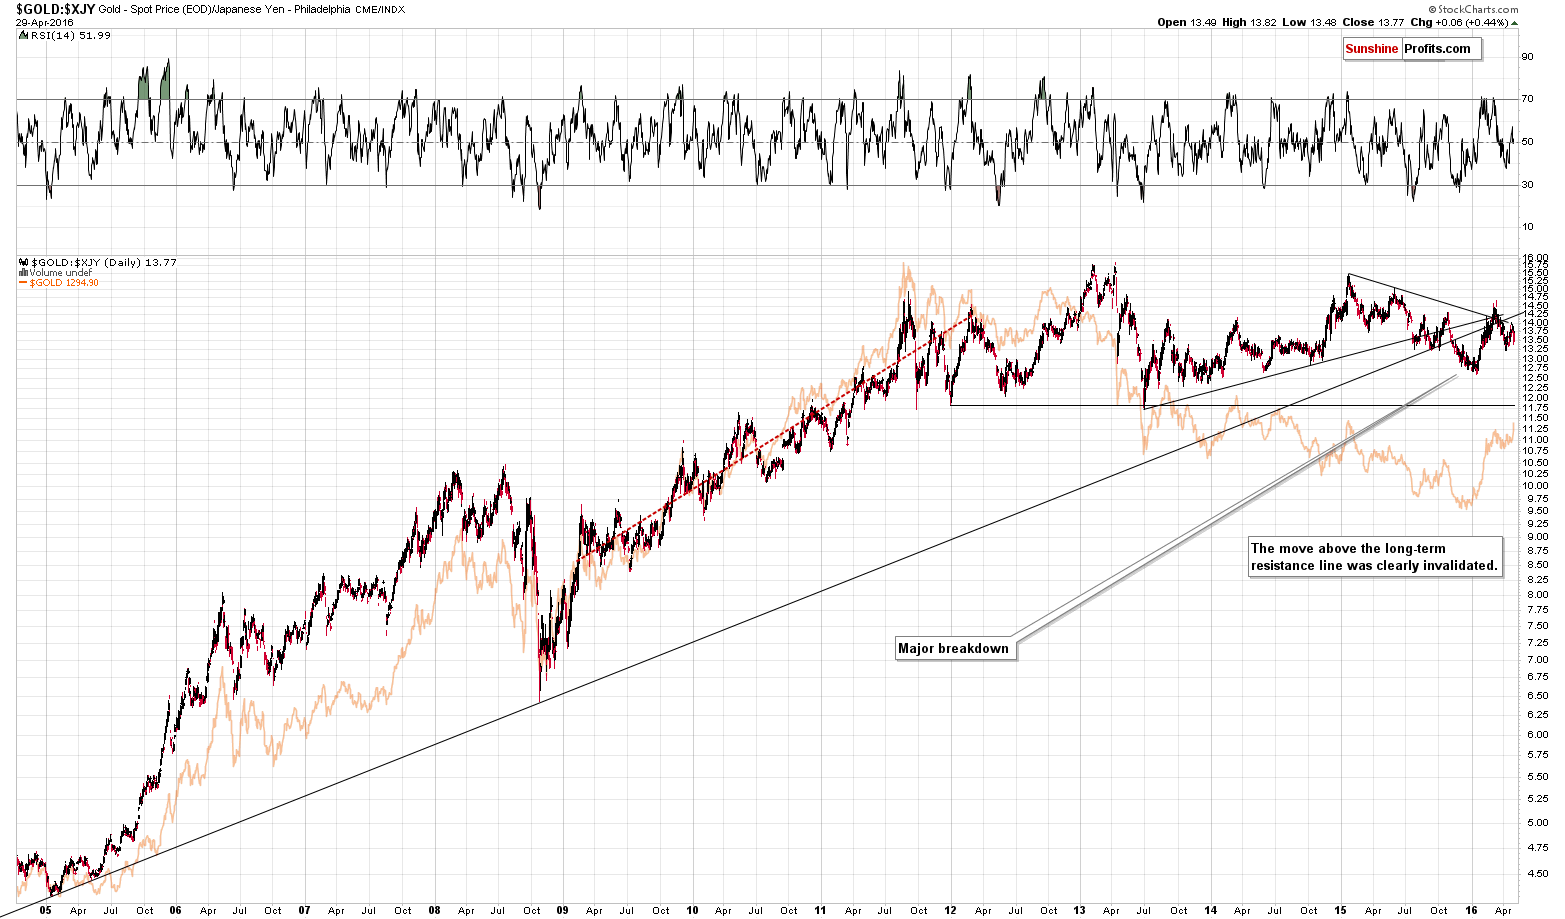 GOLD:XJY - Gold from the Japanese yen perspective